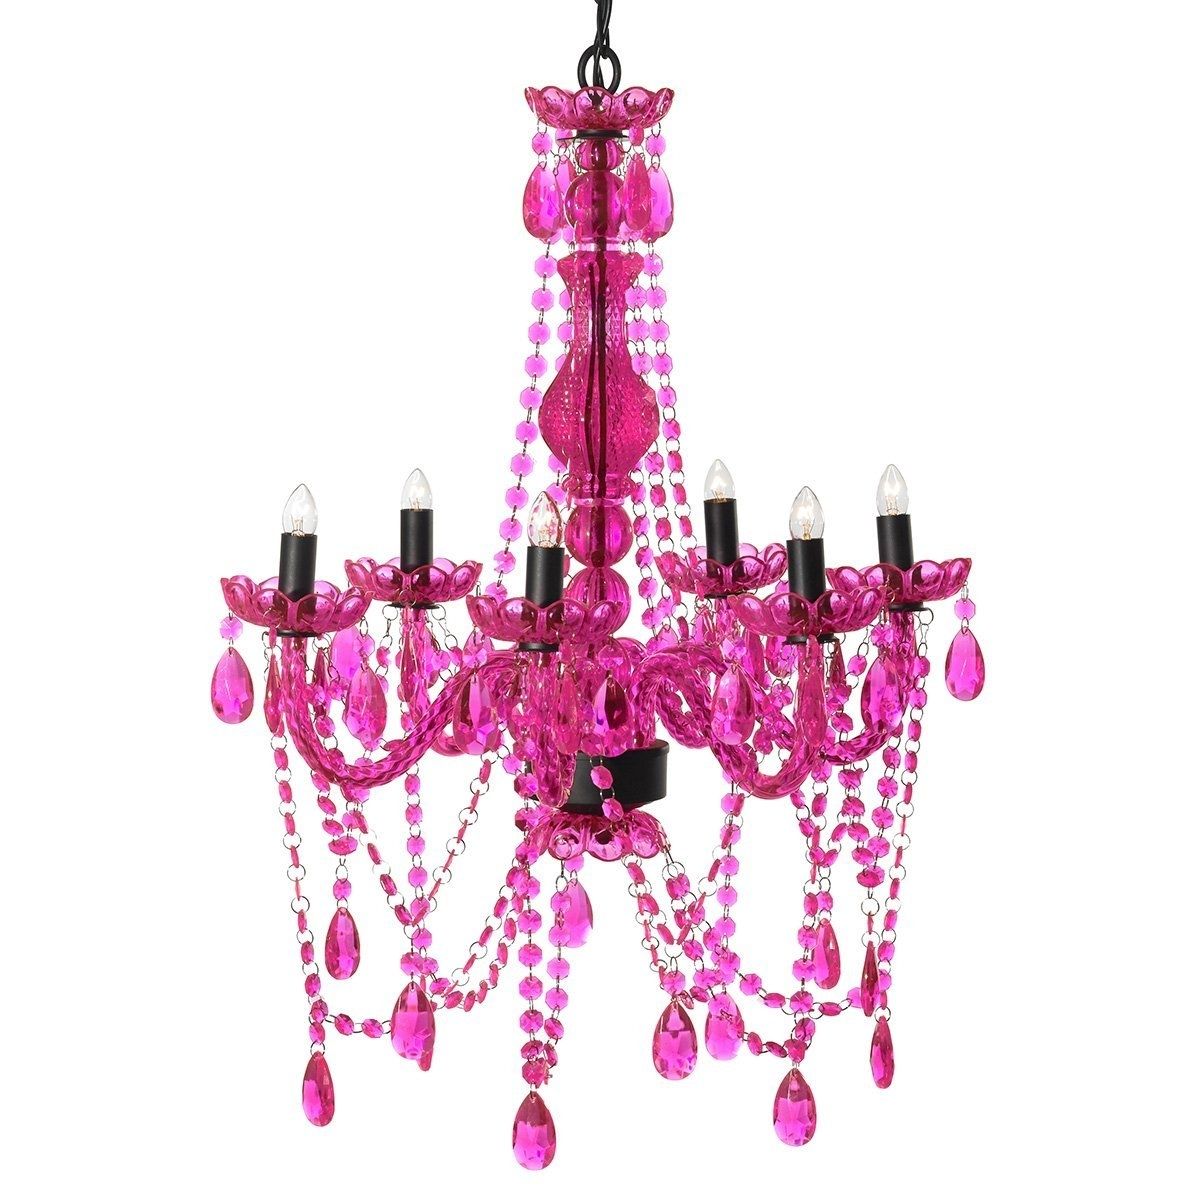 Popular Turquoise And Pink Chandeliers With Amazon: 3c4g Chandelier, Turquoise: Home & Kitchen (View 6 of 15)